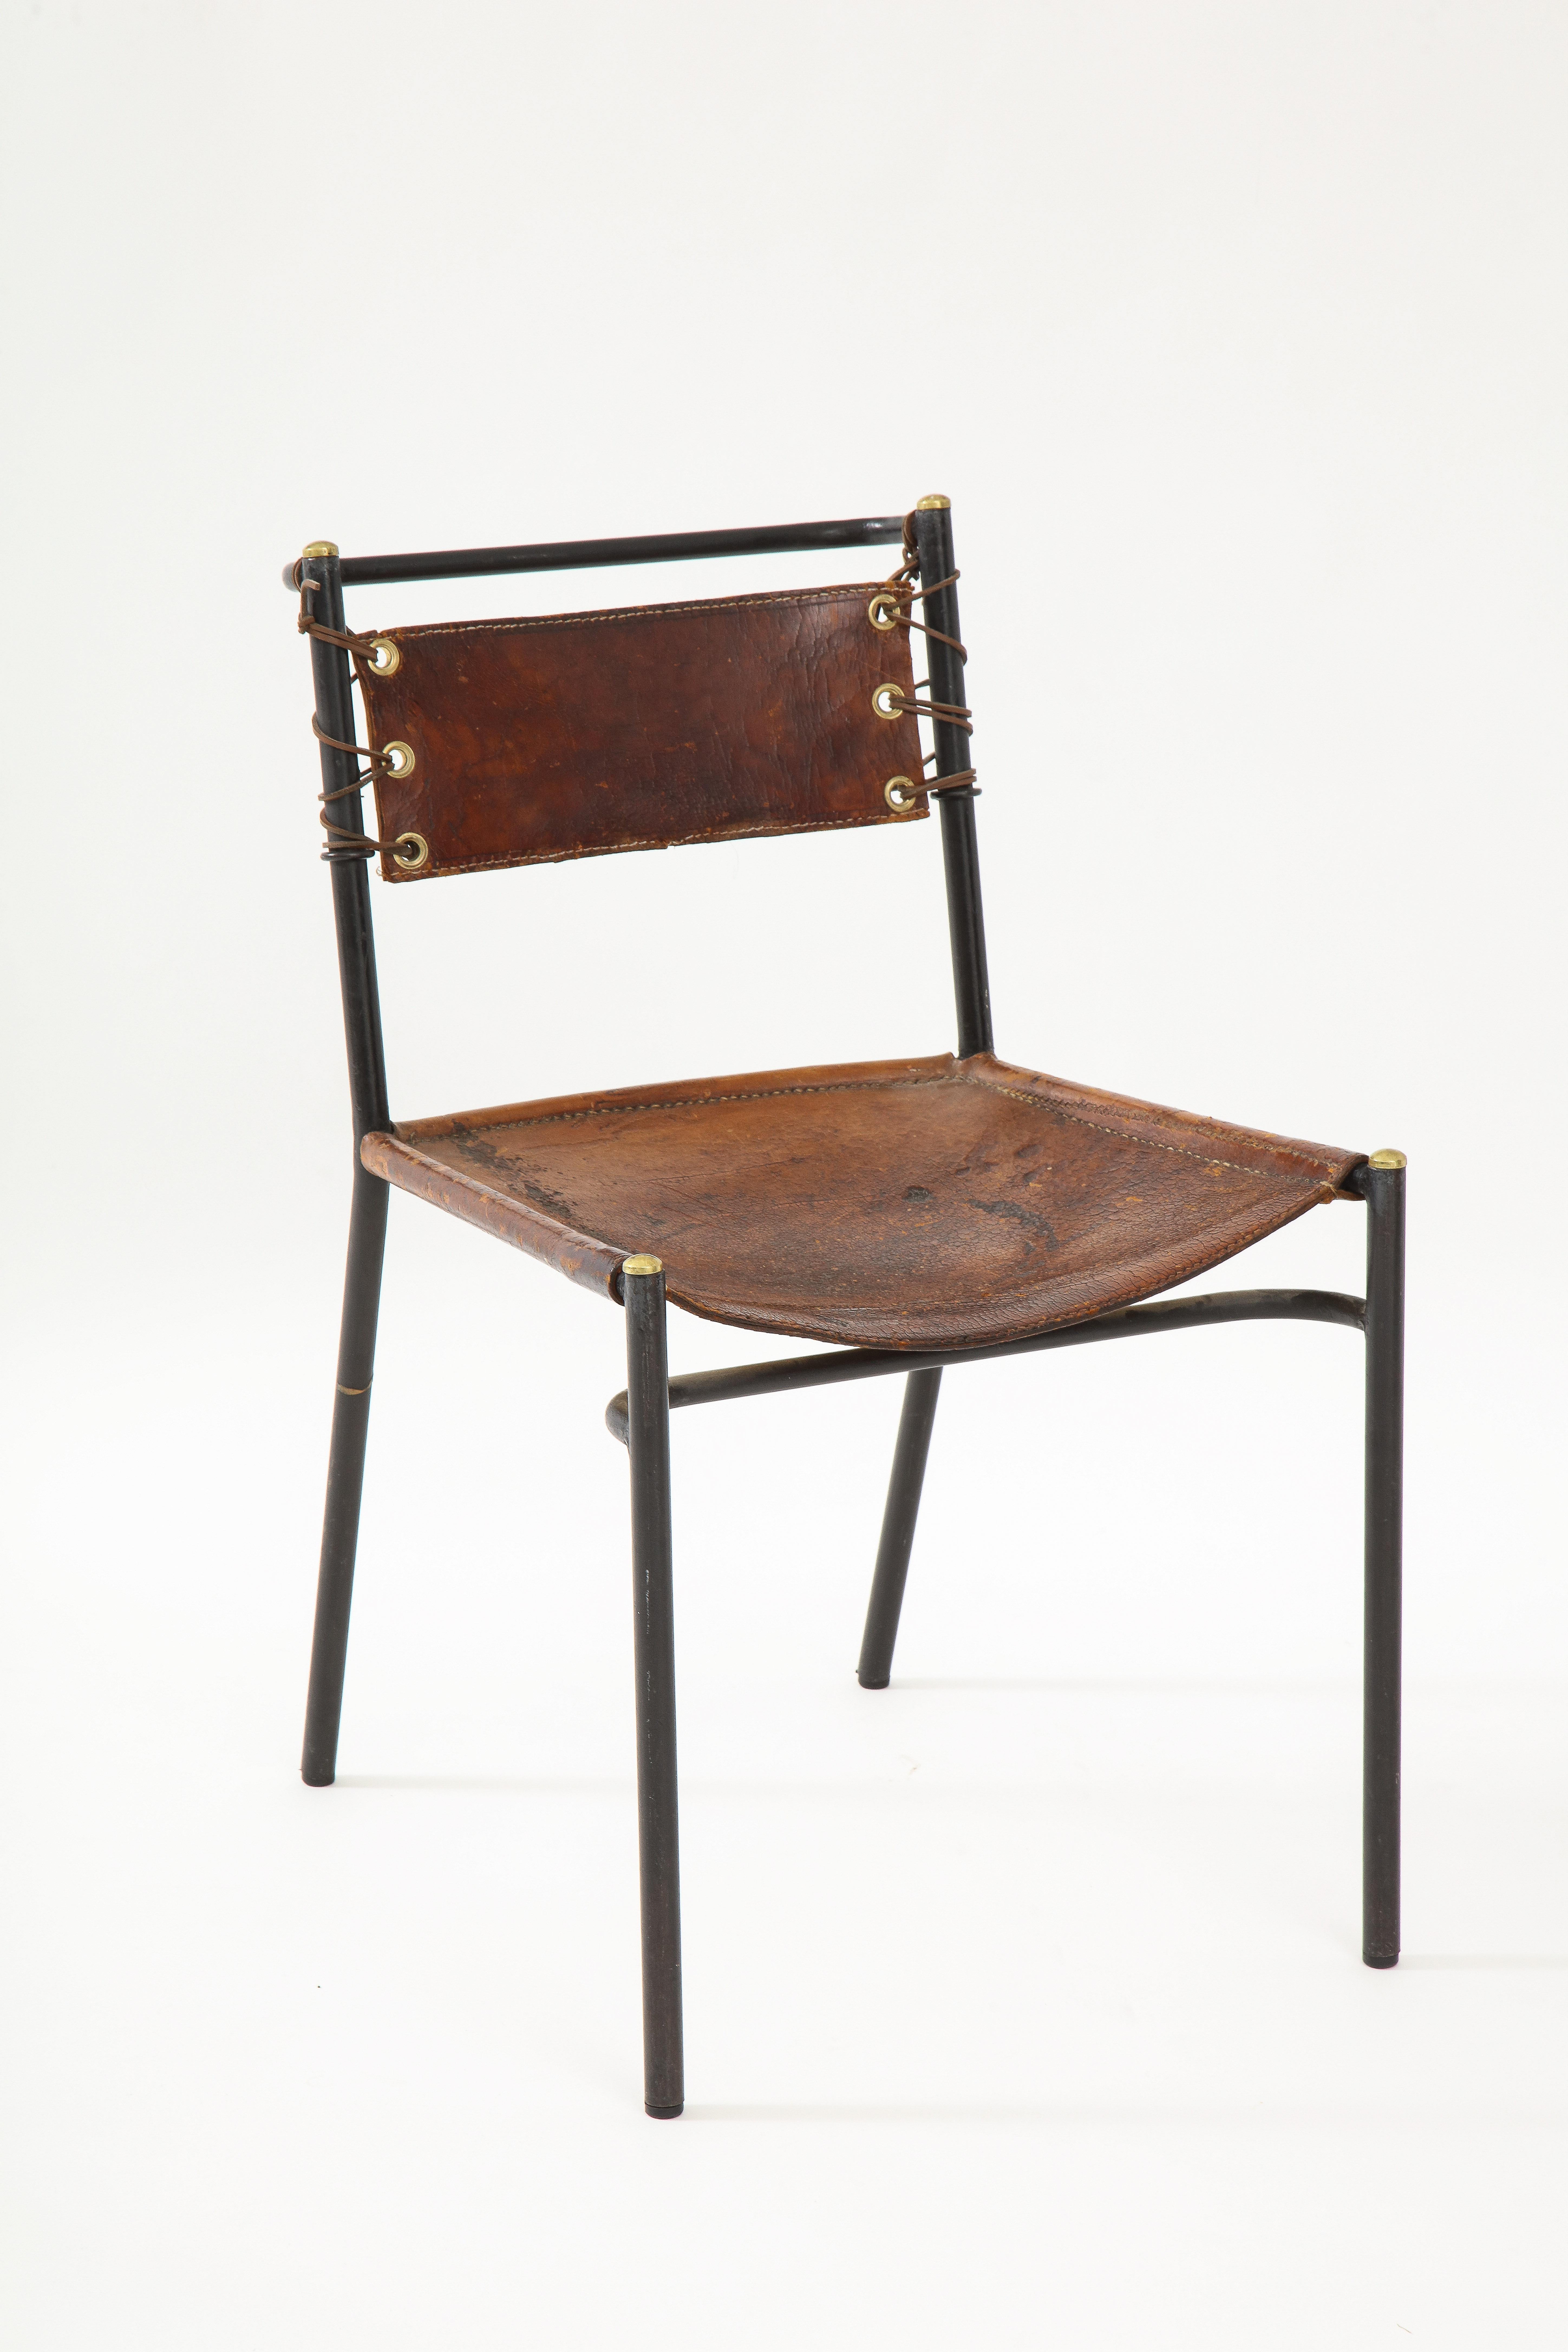 Modern Leather and Metal Side Chair in the Style of Jacques Adnet, France, c. 1950s For Sale